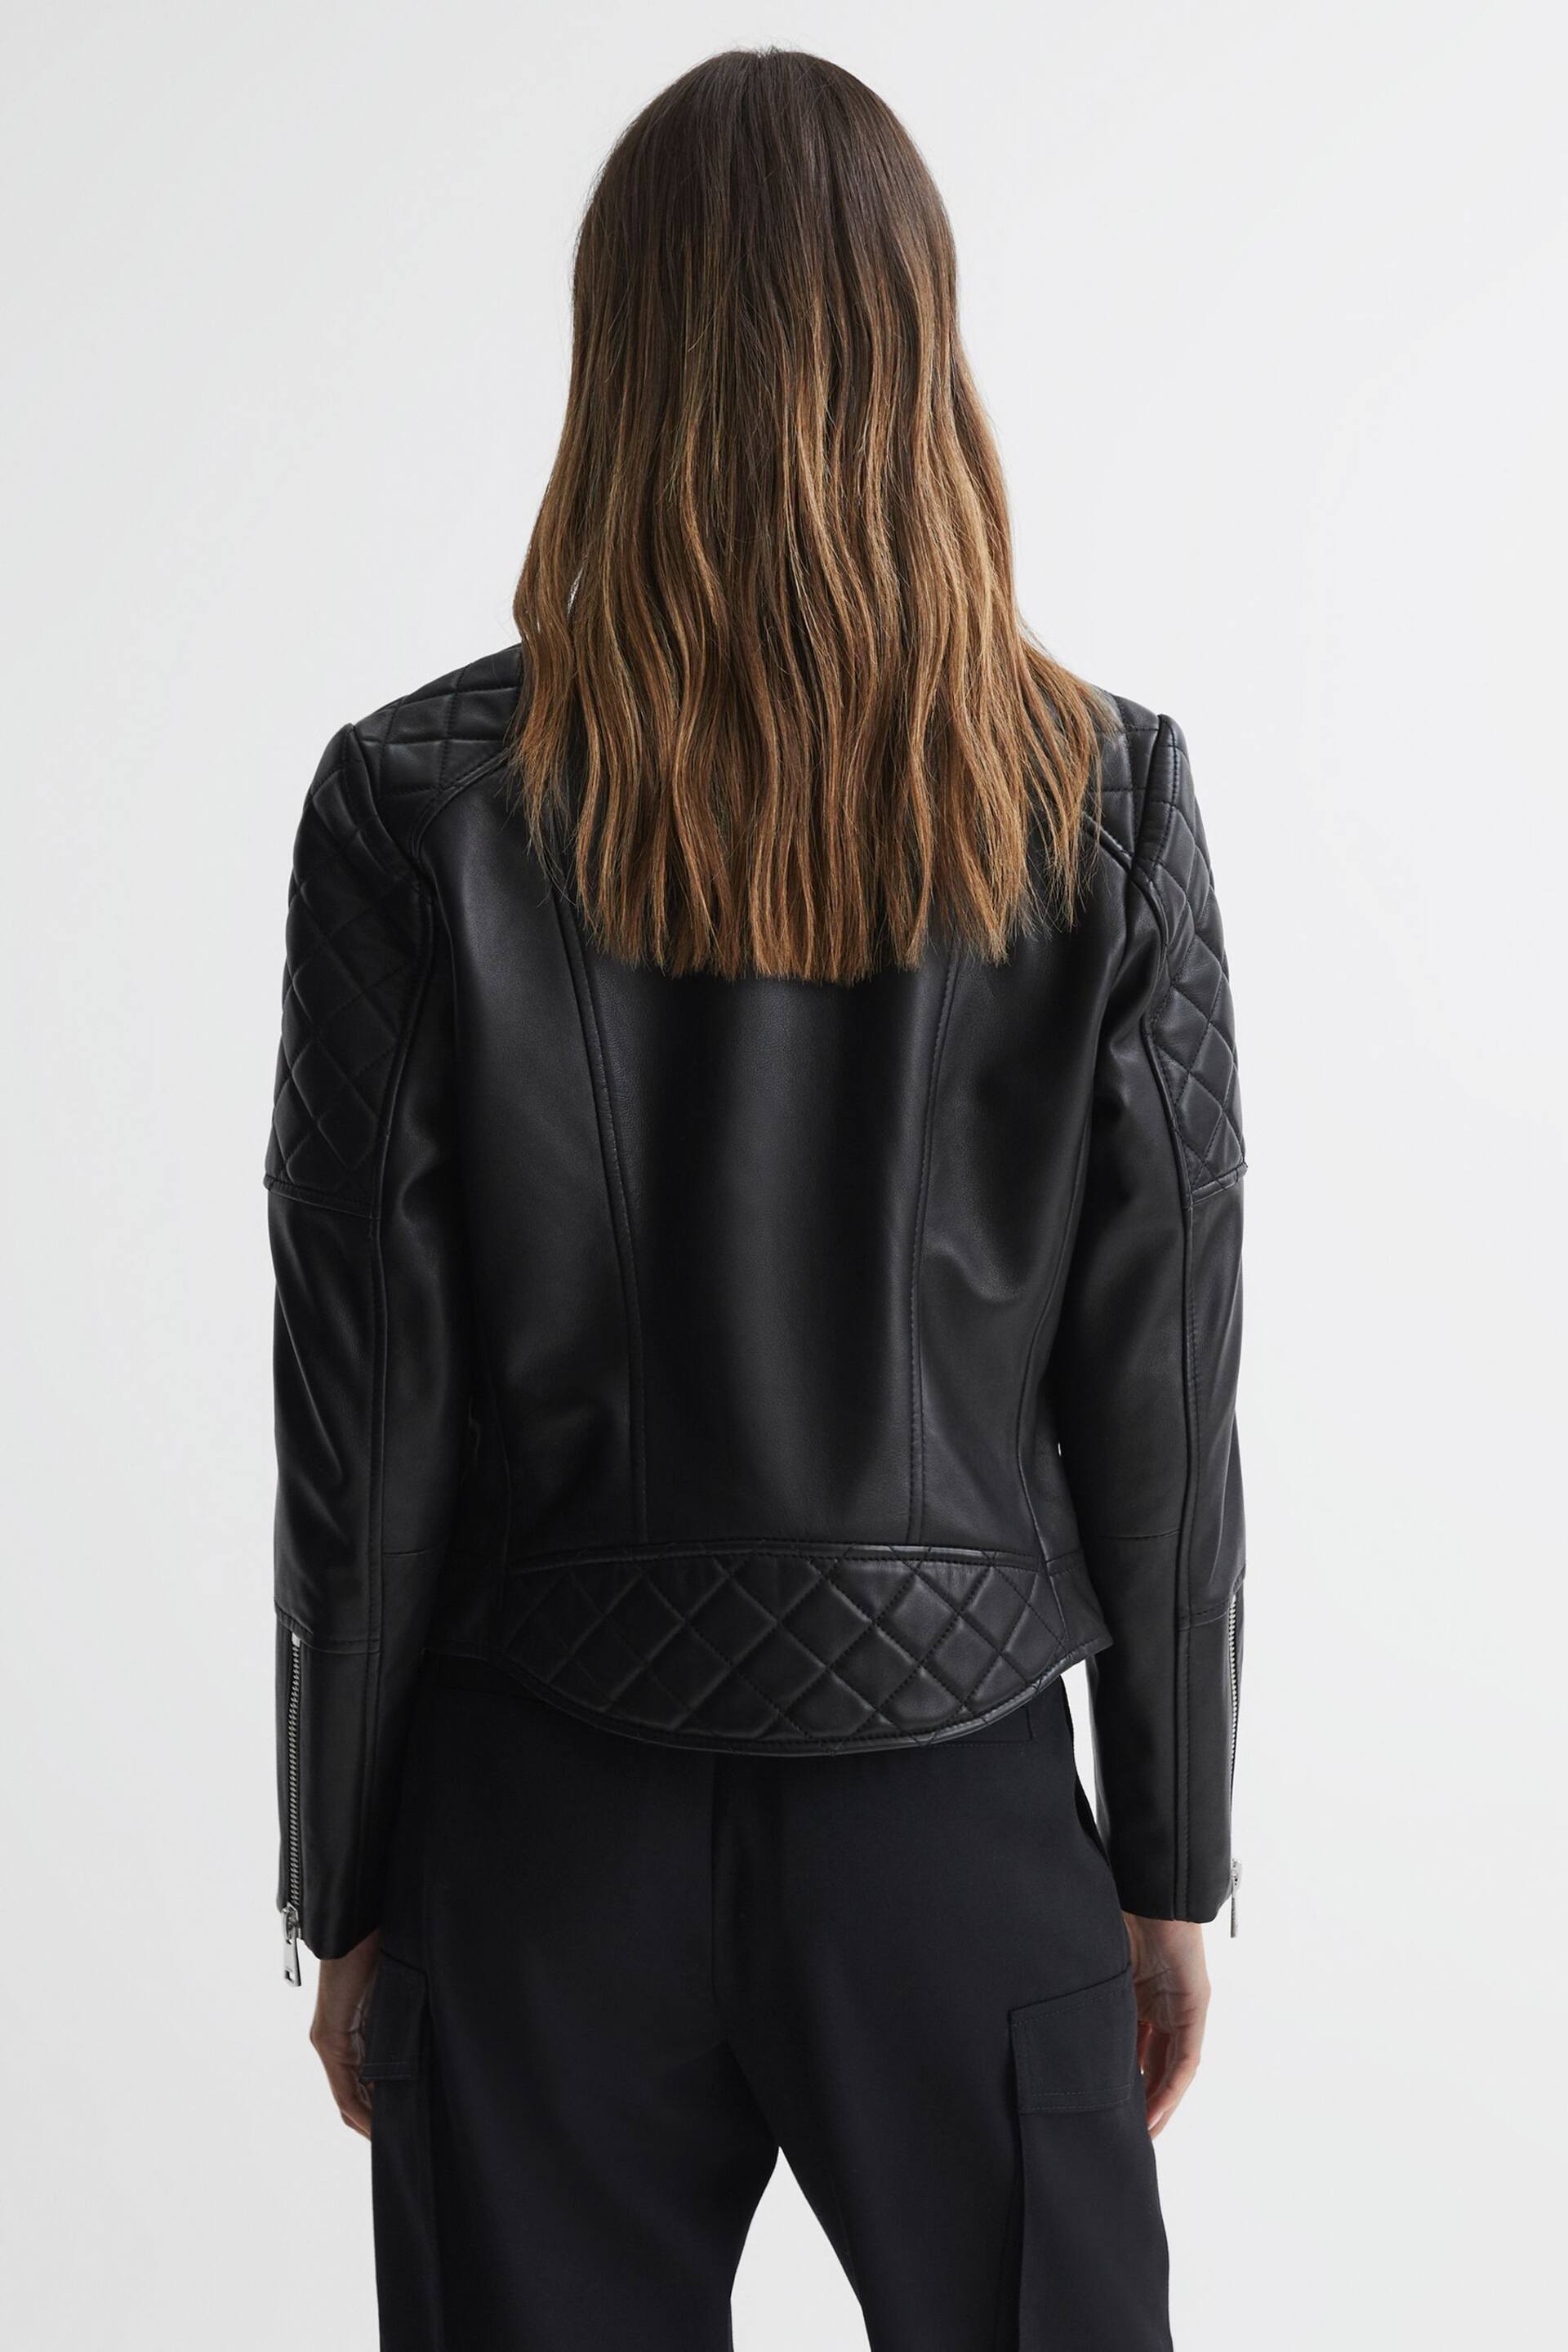 Reiss Black Adelaide Leather Collarless Quilted Jacket - Image 5 of 5